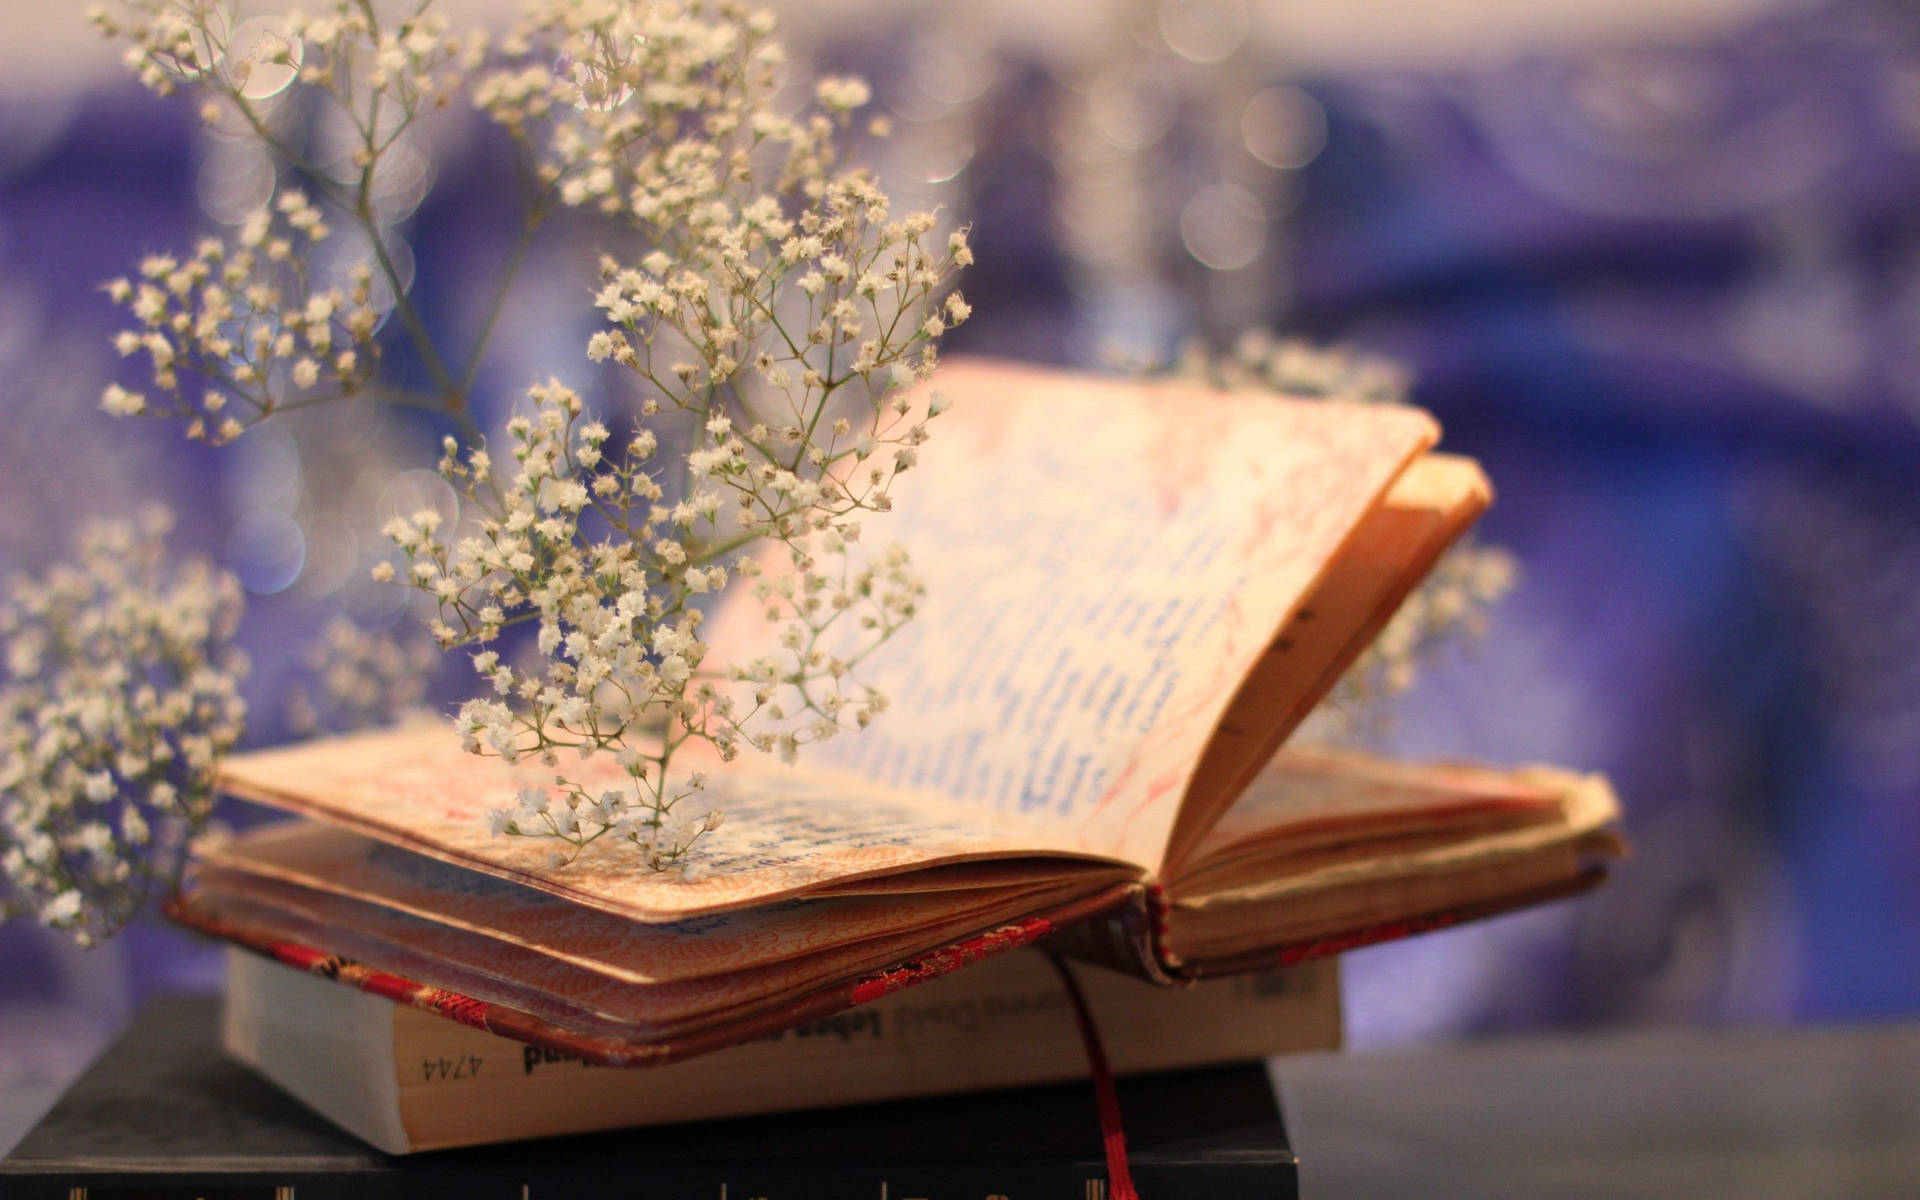 Book With White Flowers